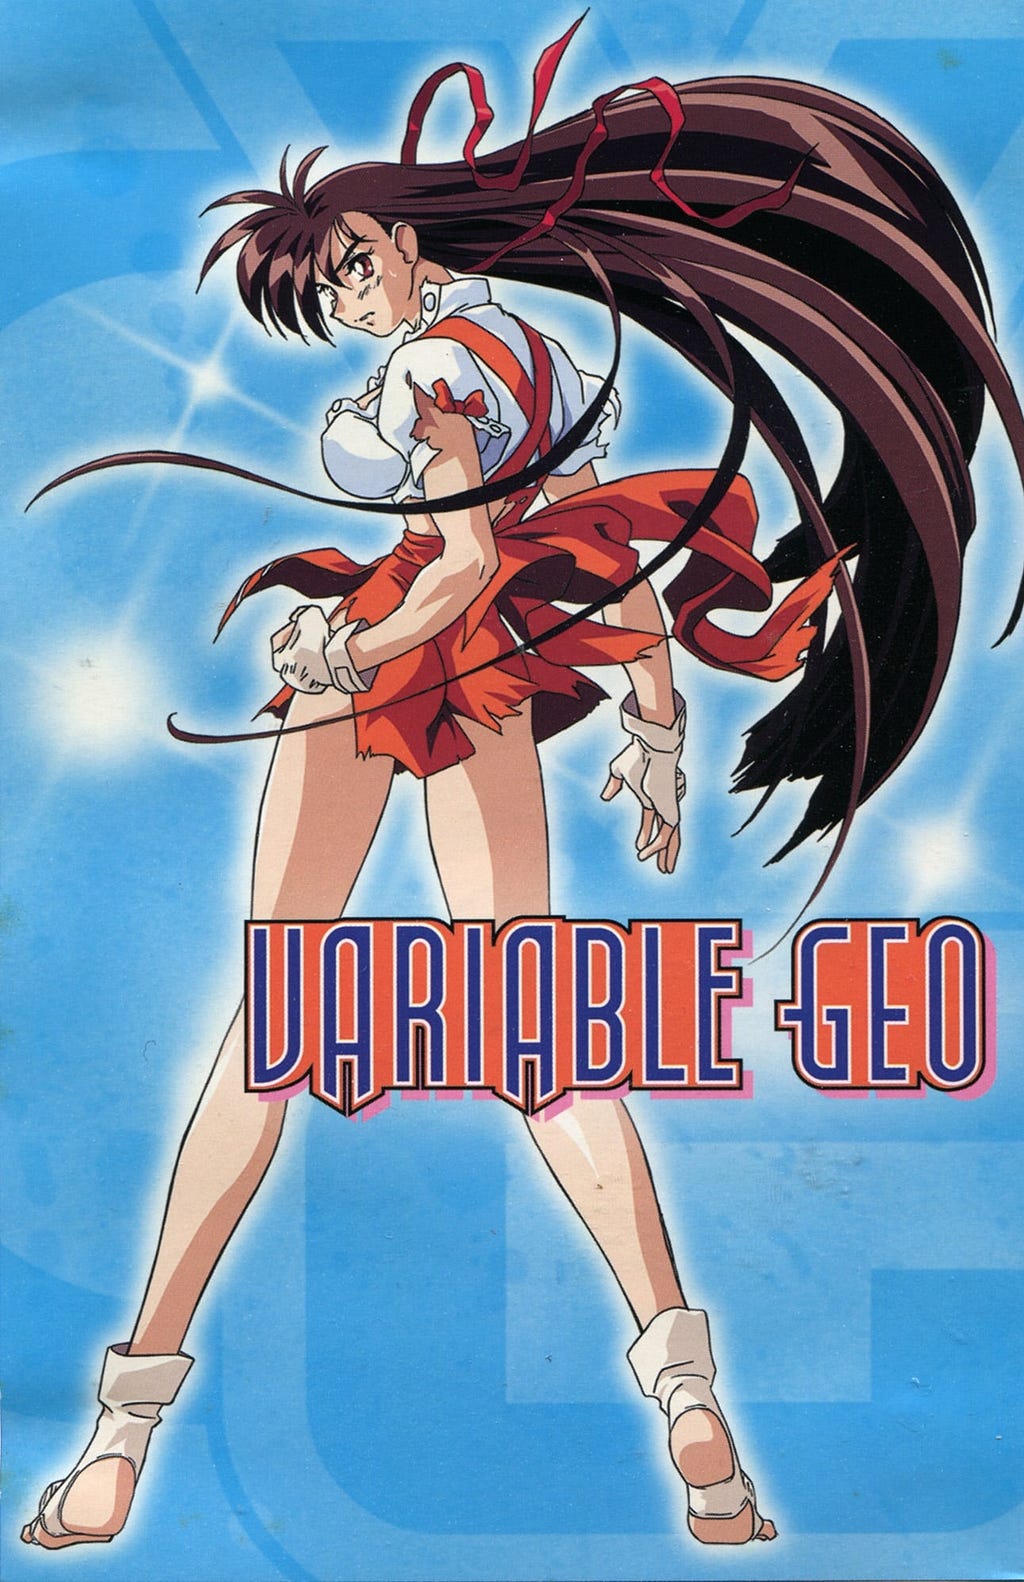 Variable Geo (1996) | Poster